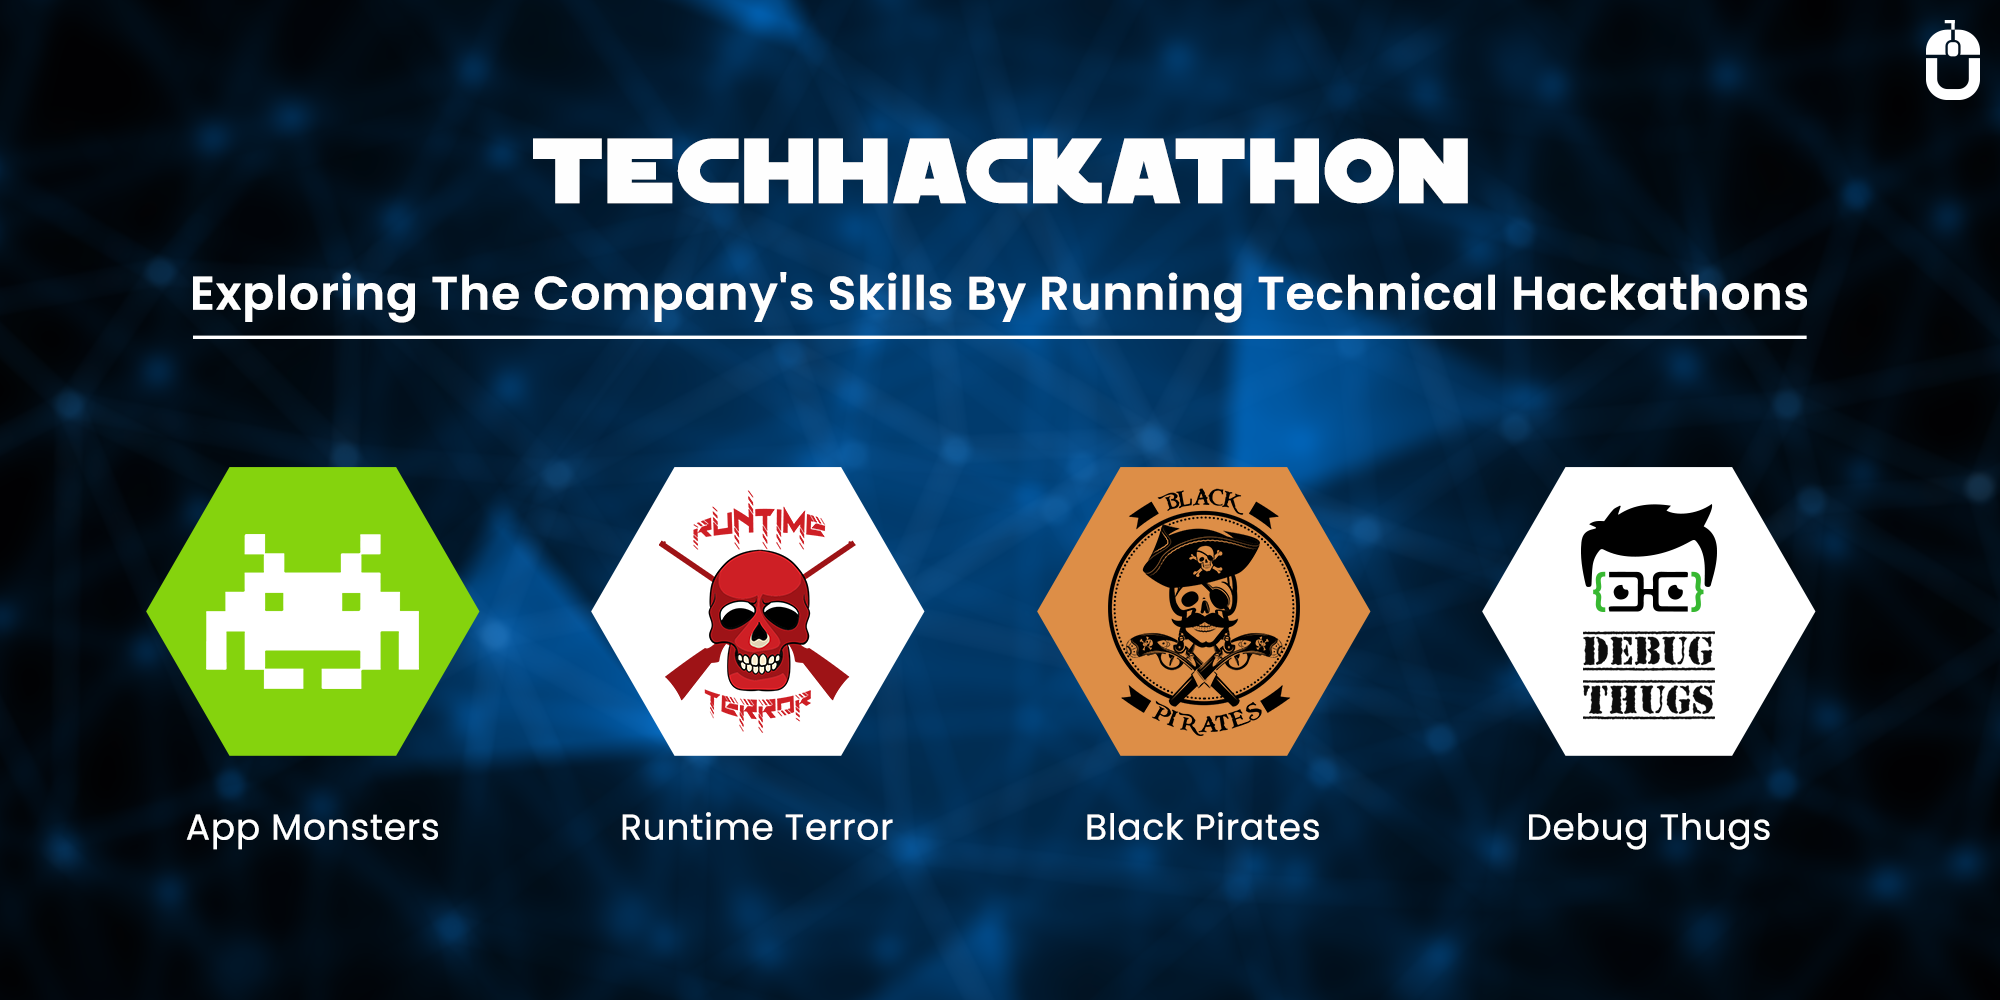 Exploring The Company’s Skills By Running Technical Hackathons